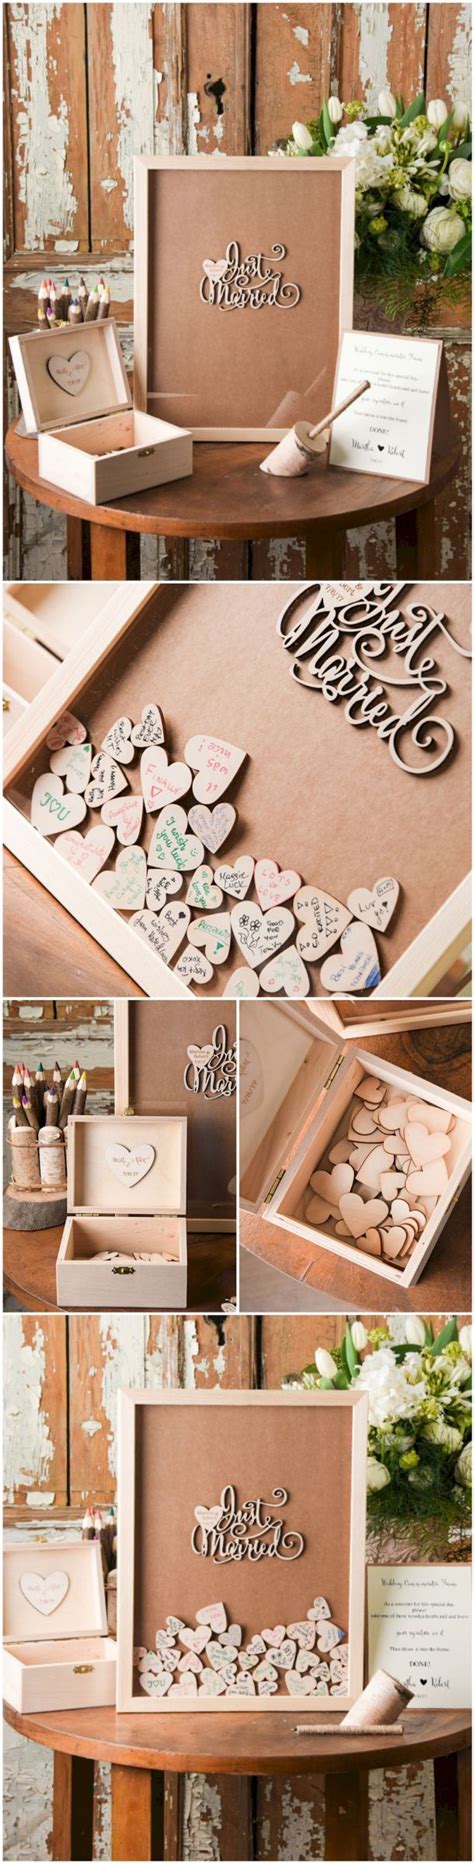 Find & download the most popular wedding frame photos on freepik free for commercial use high quality images over 10 million stock photos. 41 Awesome Wedding Ideas with Frame (With images) | Vintage wedding guest book, Wedding guest ...